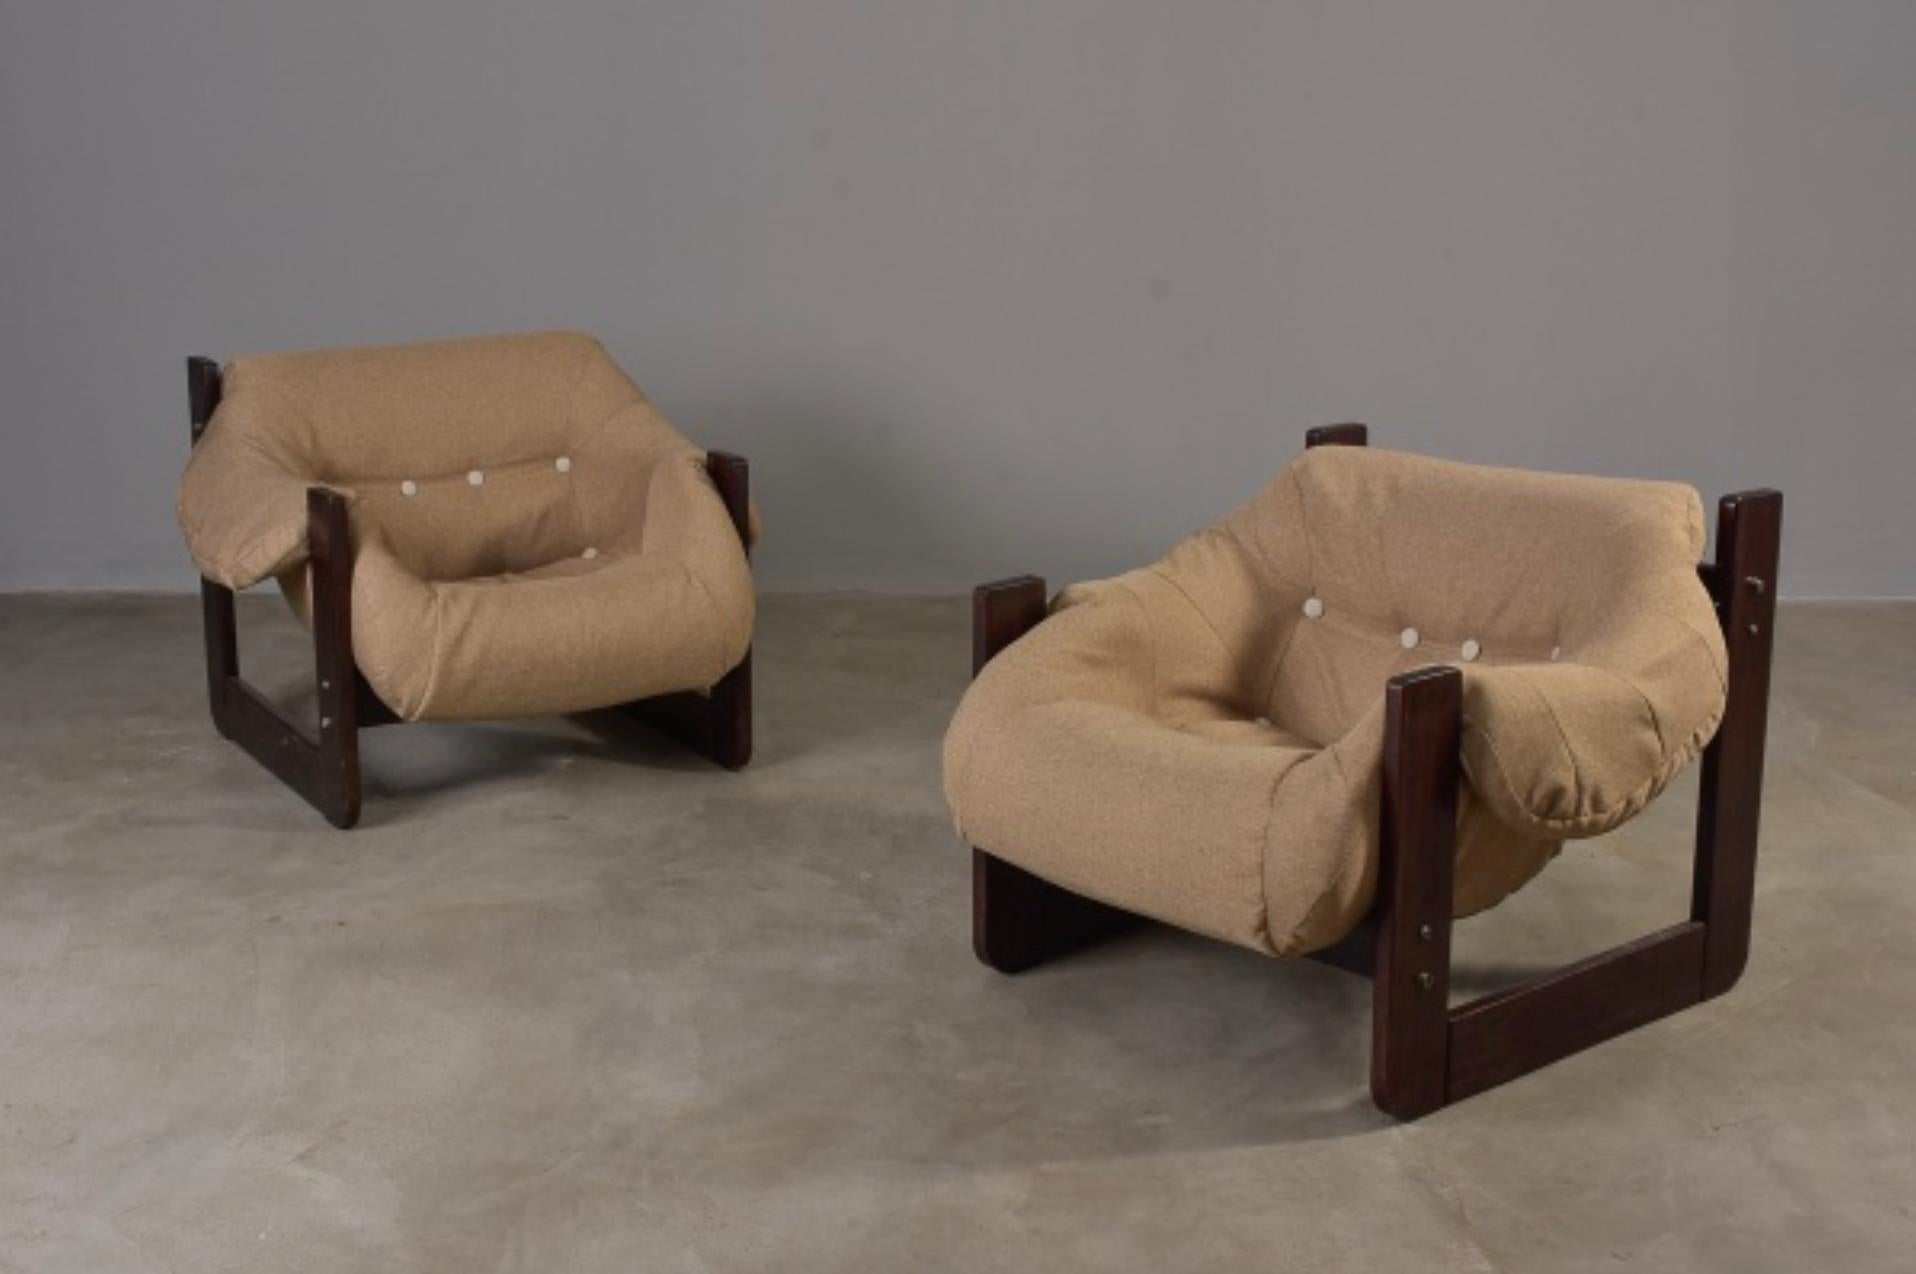 In his designs, Percival Lafer sought ergonomy and comfort.  This pair of Mid-Century Modern lounge chairs by Percival Lafer comprises ebonized solid wood and new upholstery. Its unique design and construction make this an authentic statement piece.